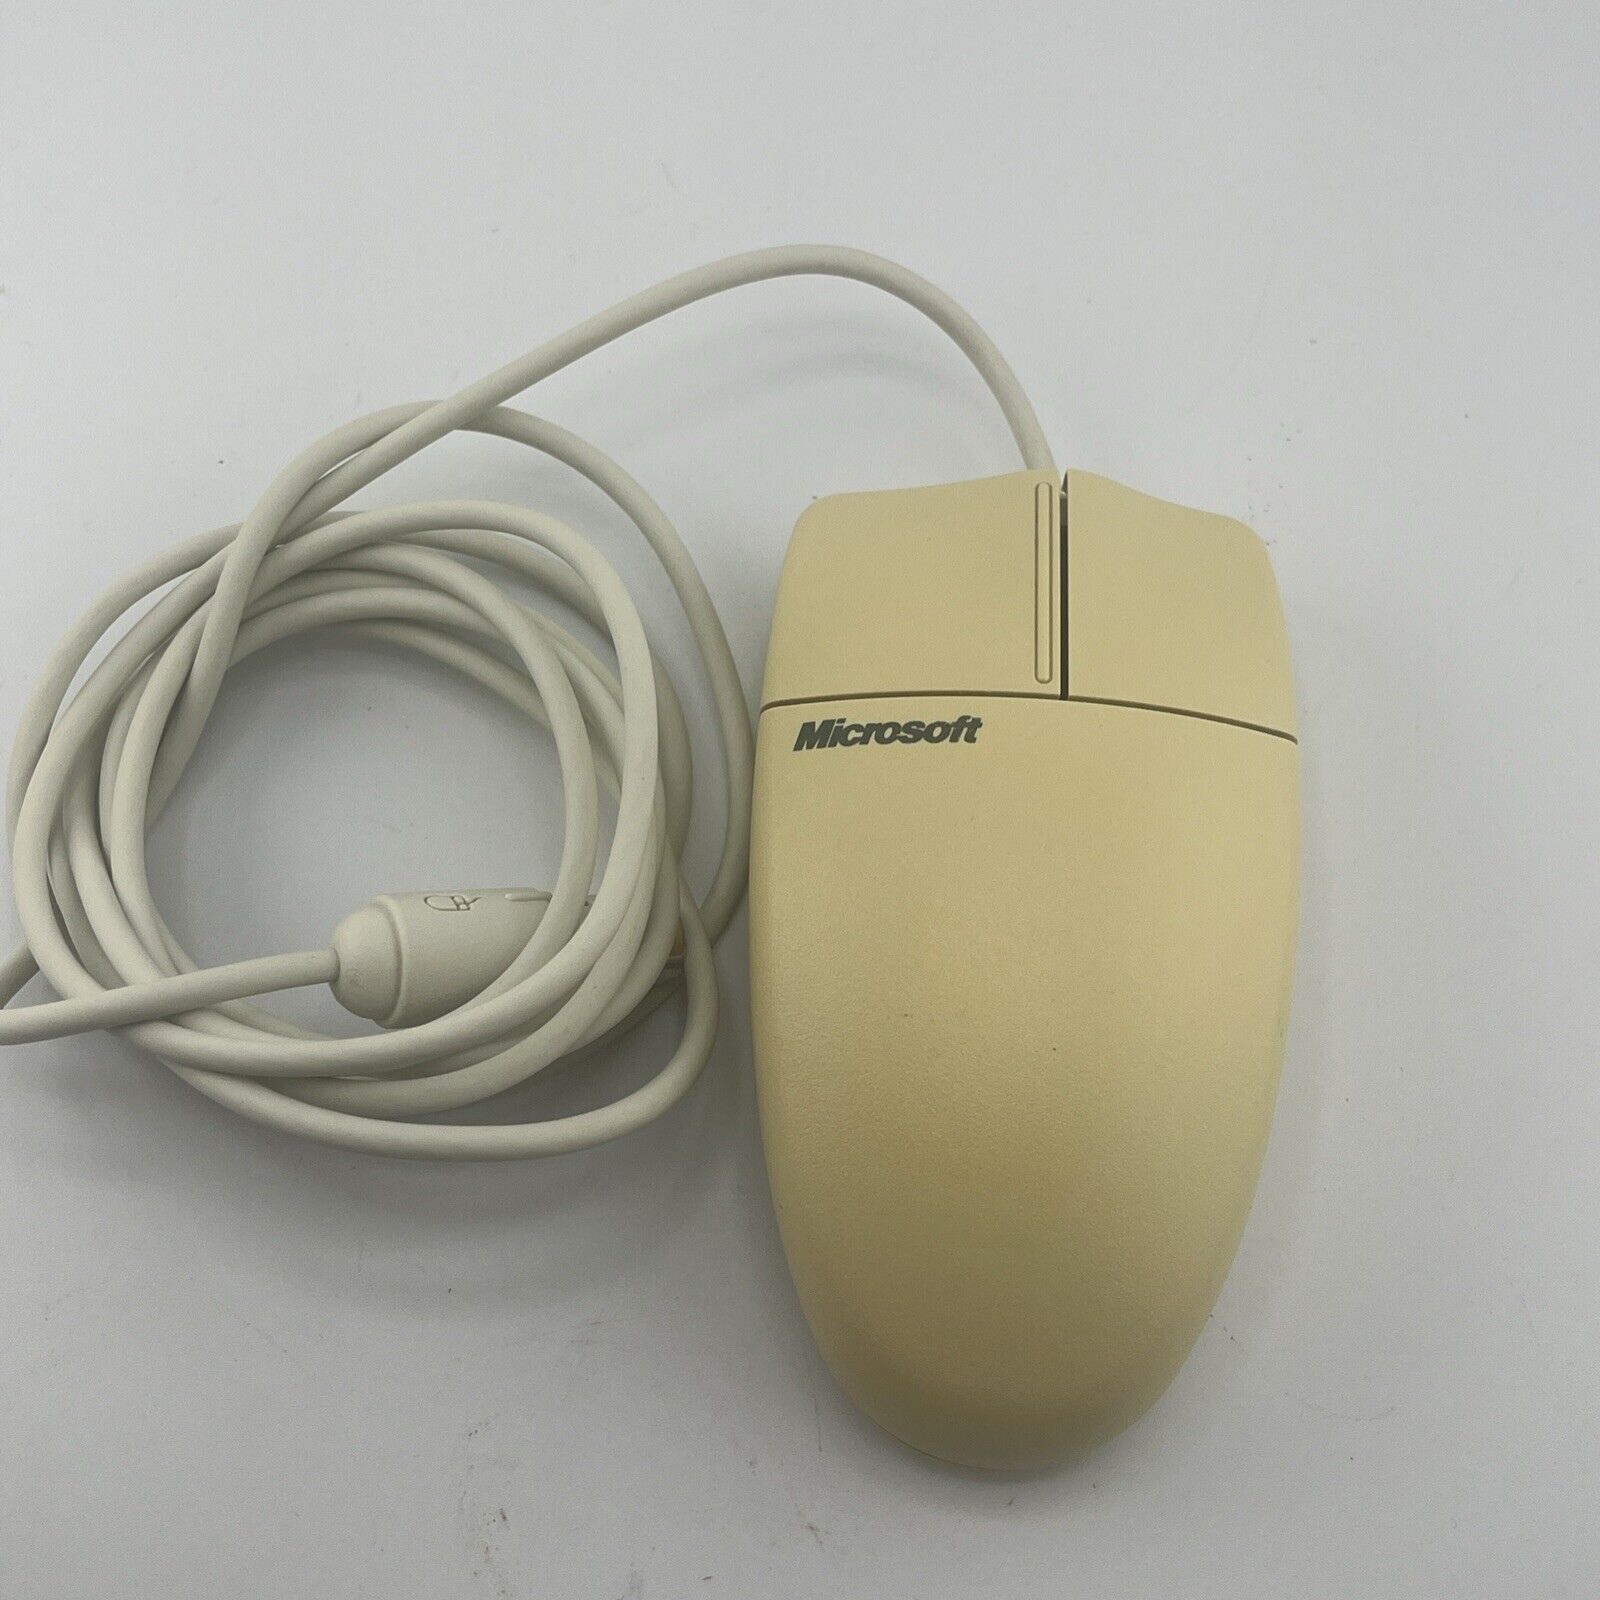 Vintage Microsoft Serial-PS/2 Trackball Mouse, Old, Working, Original Tested